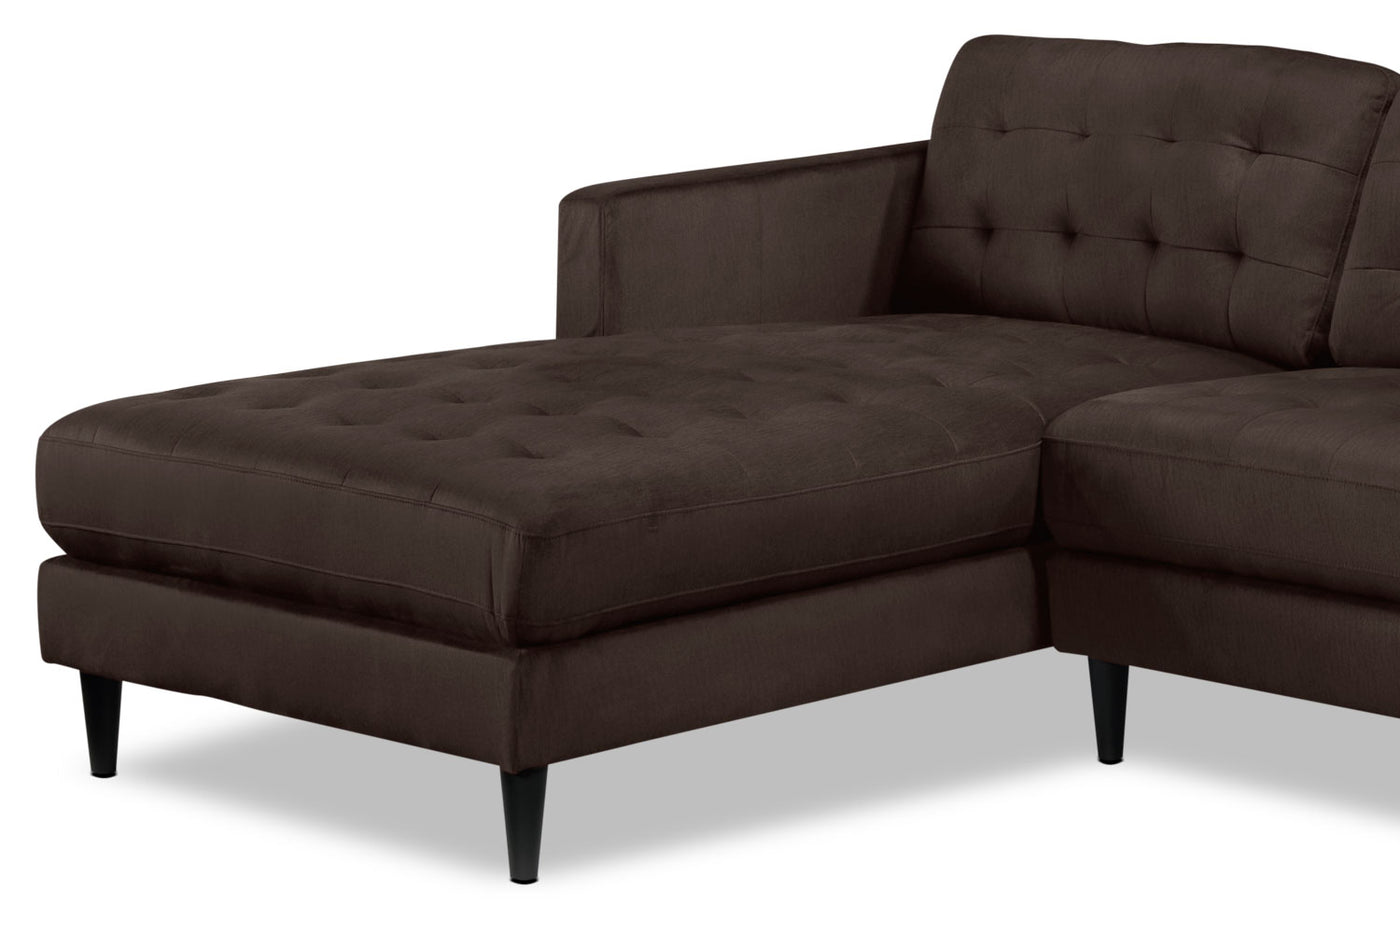 Paragon 2-Piece Sectional with Left-Facing Chaise - Dark Chocolate